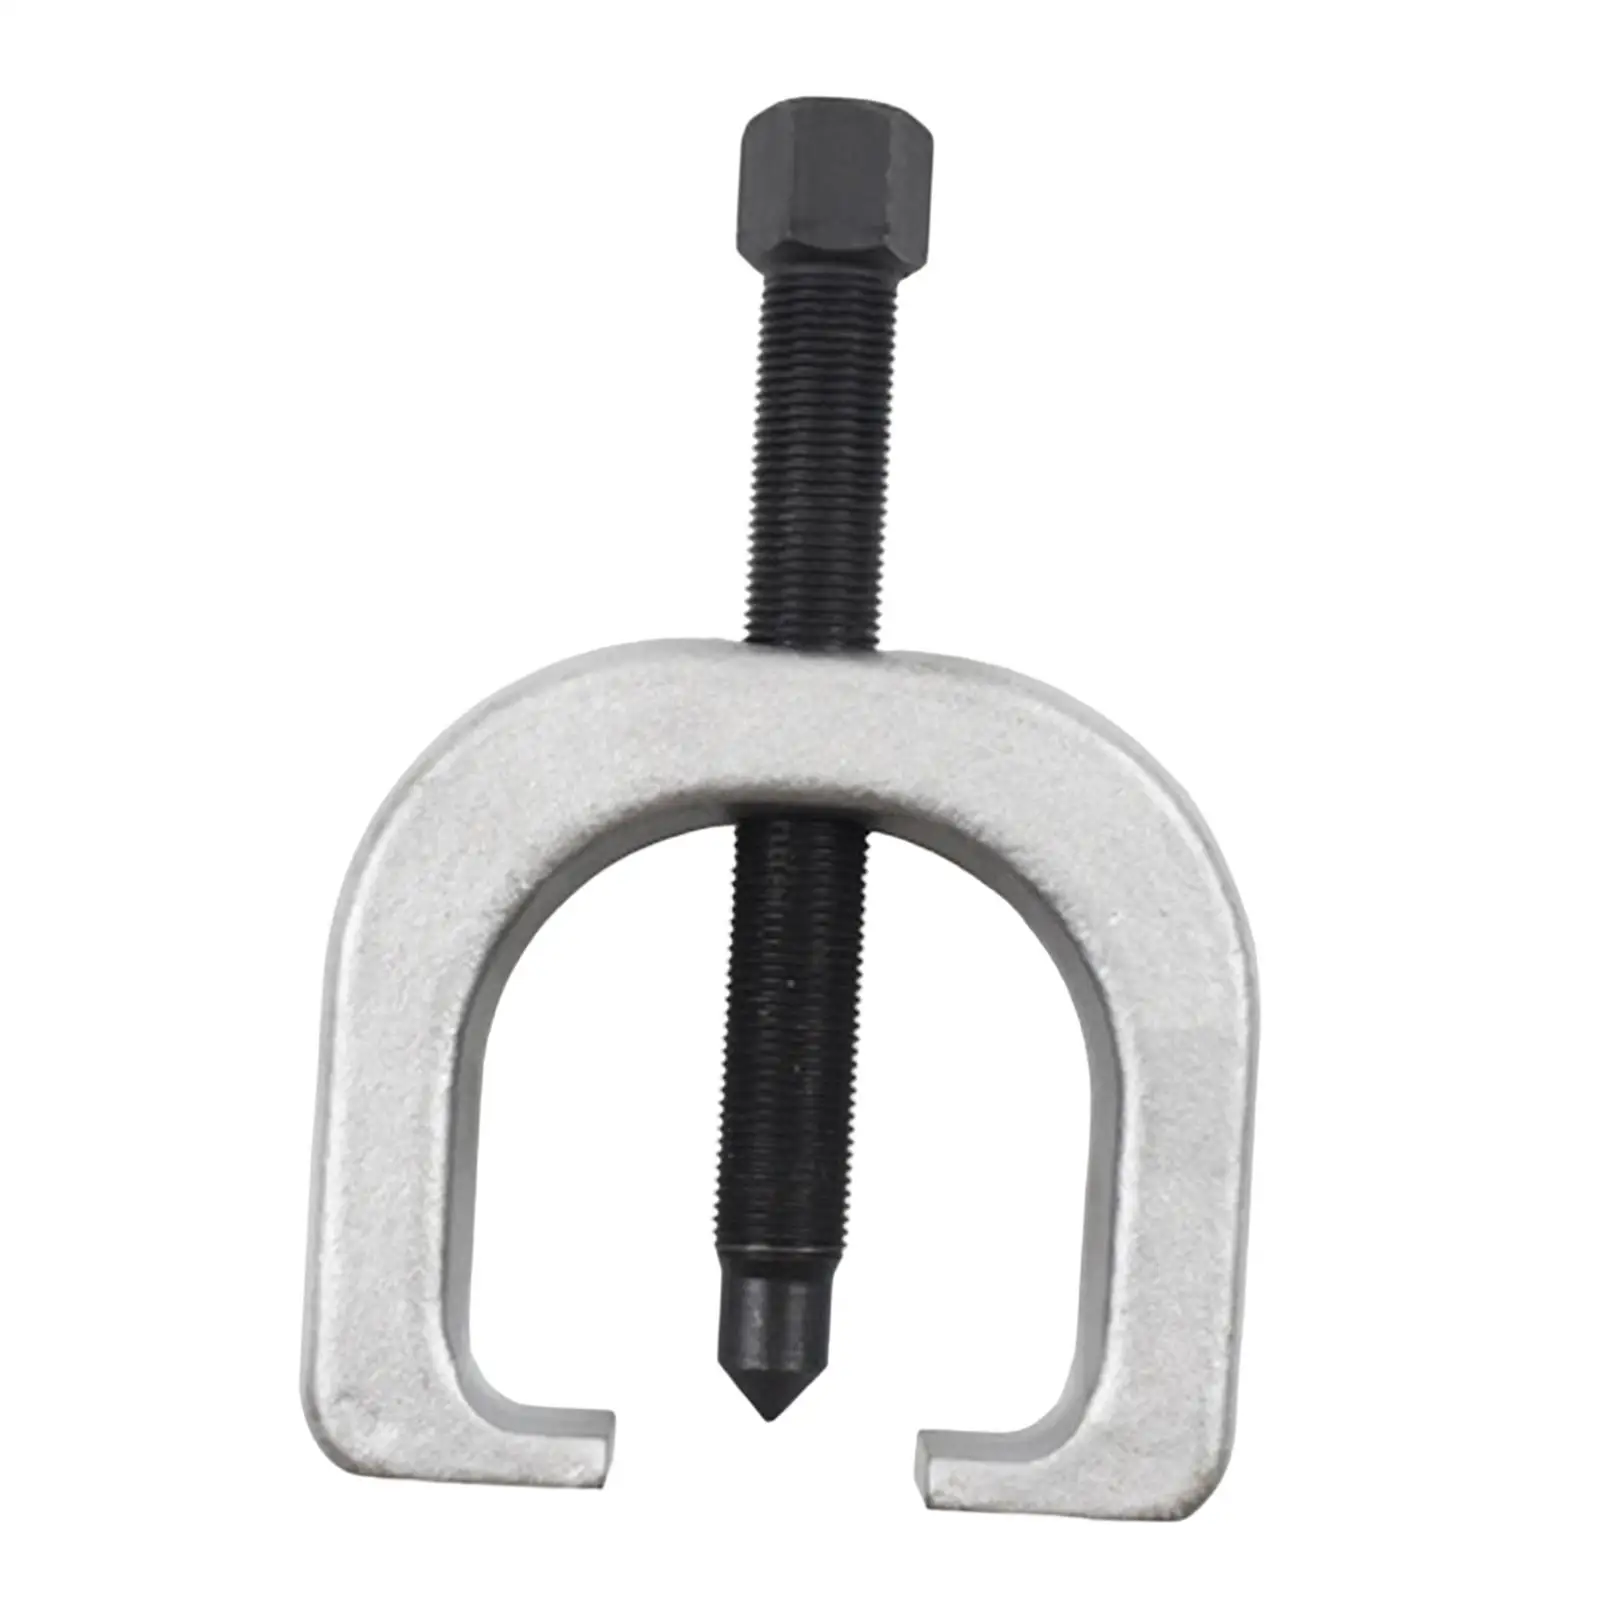 Slack Adjuster Puller Easy to Operate Compact Sturdy Professional Carbon Steel Removal Tool Repair Tool for Trailers Trucks